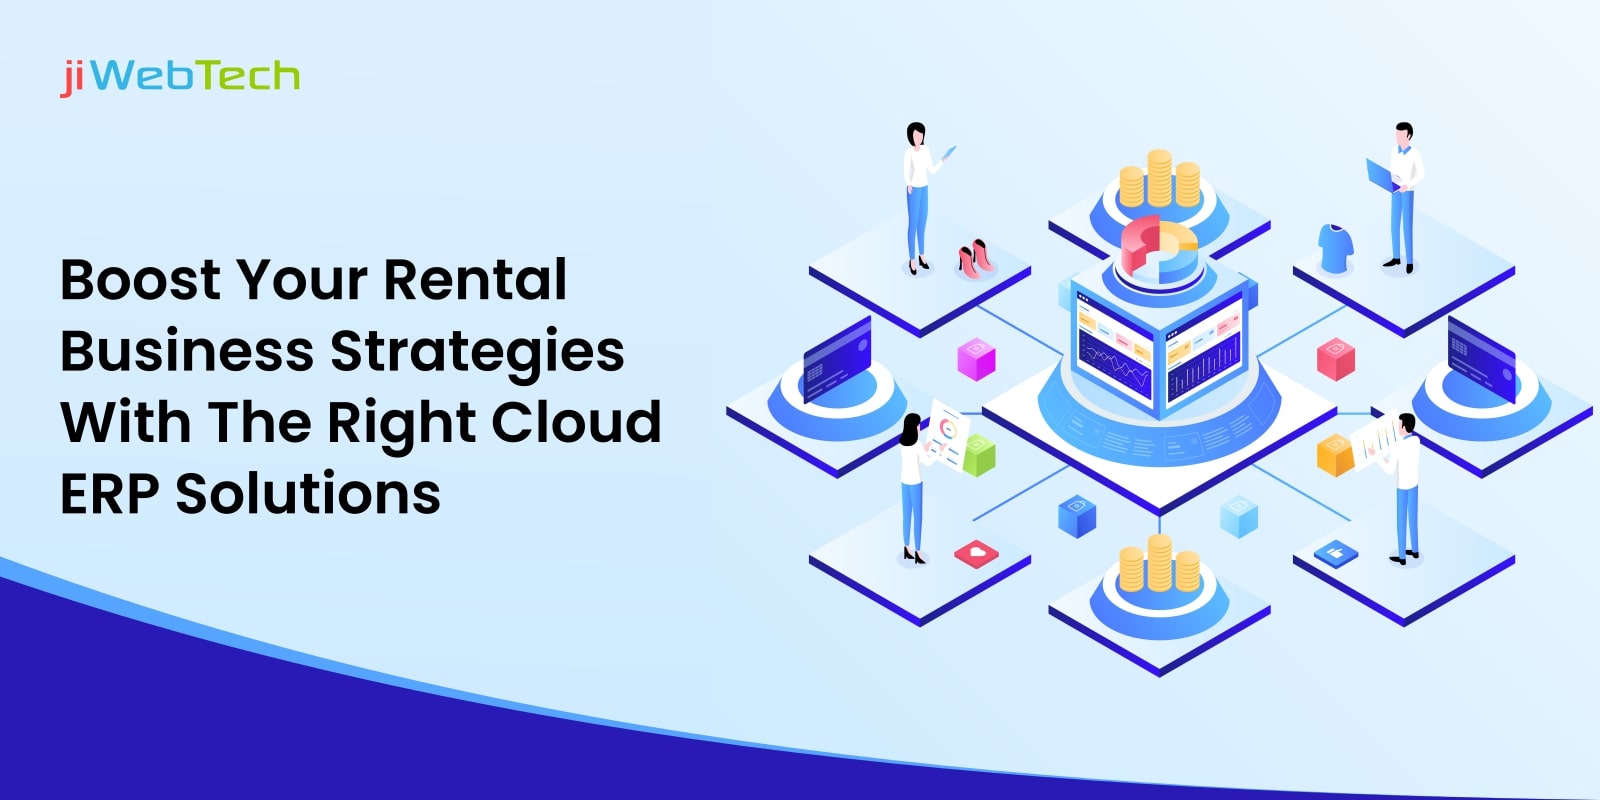 Boost Your Rental Business Strategies With The Right Cloud ERP Solutions